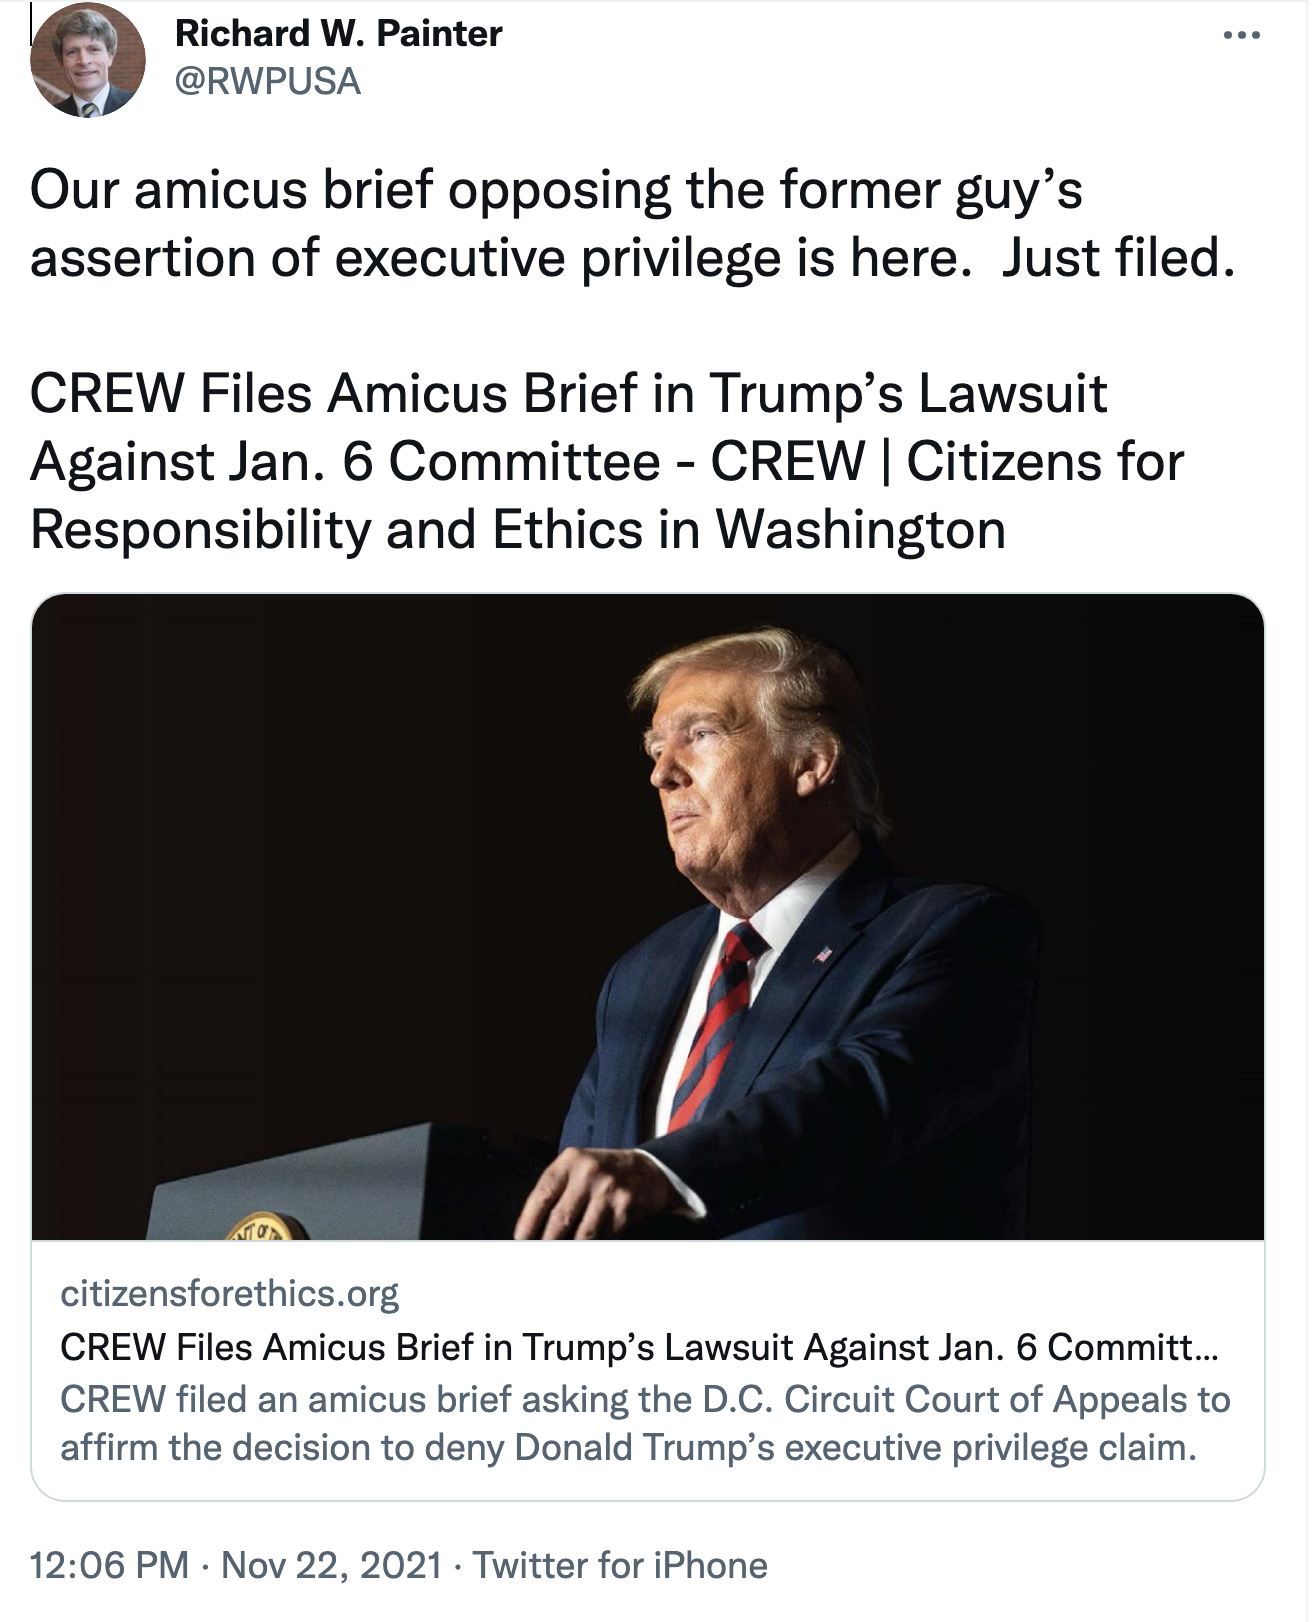 Screen-Shot-2021-11-22-at-4.39.43-PM Gov't Watchdog Teams Up With W.H. & Select Committee Against Trump Crime Featured Politics Terrorism Top Stories 